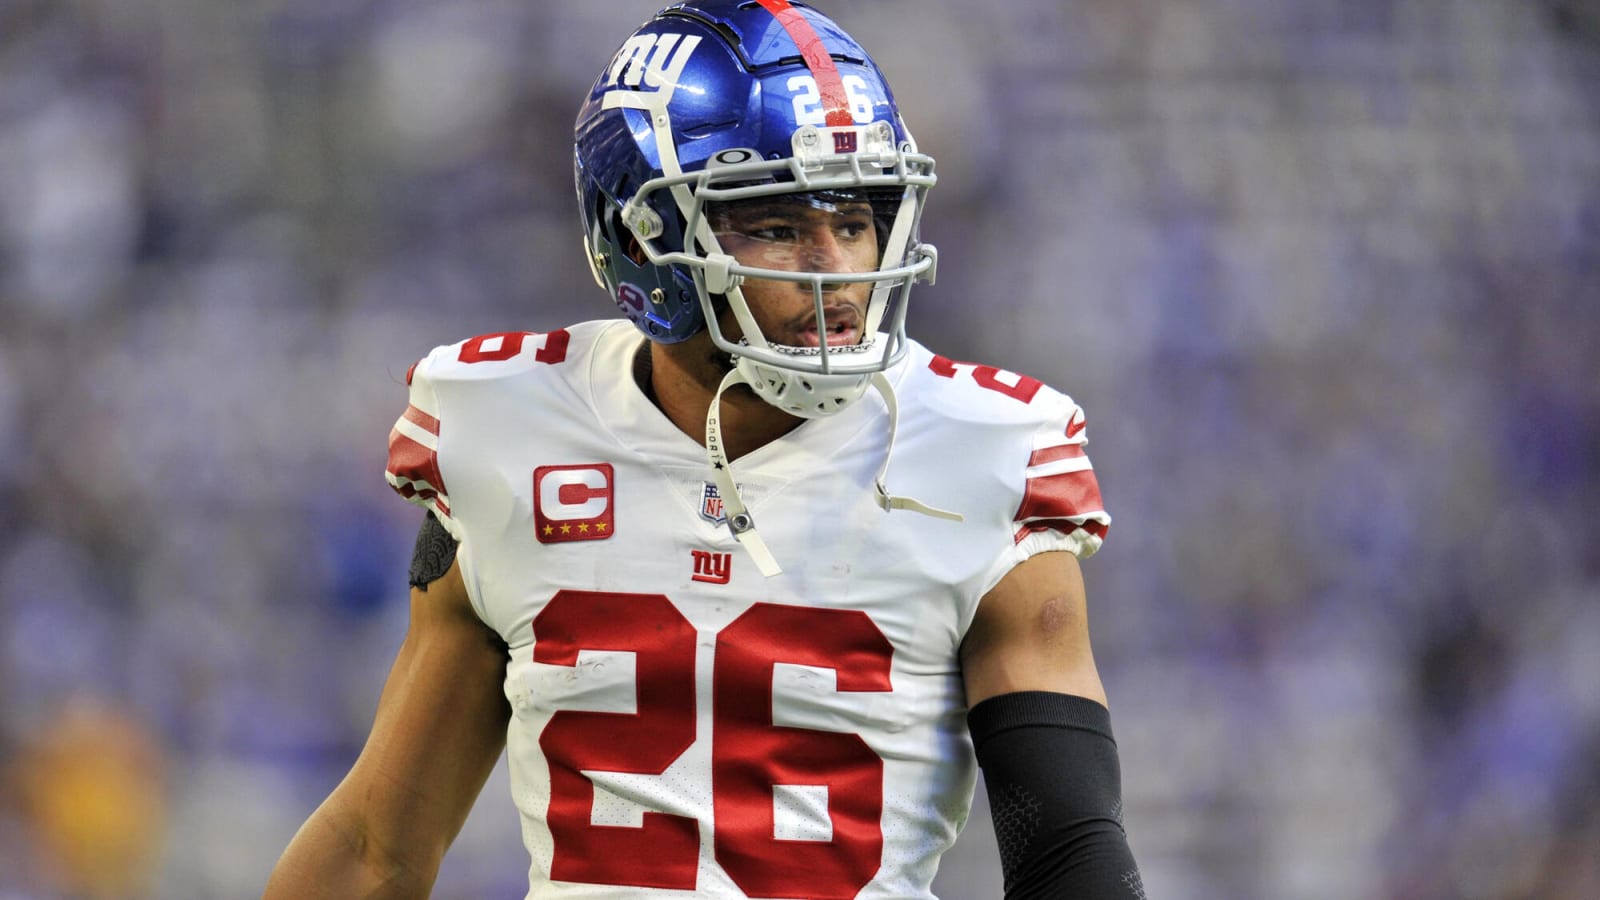 Top five moments from the New York Giants’ thrilling Wild Card win over the Vikings